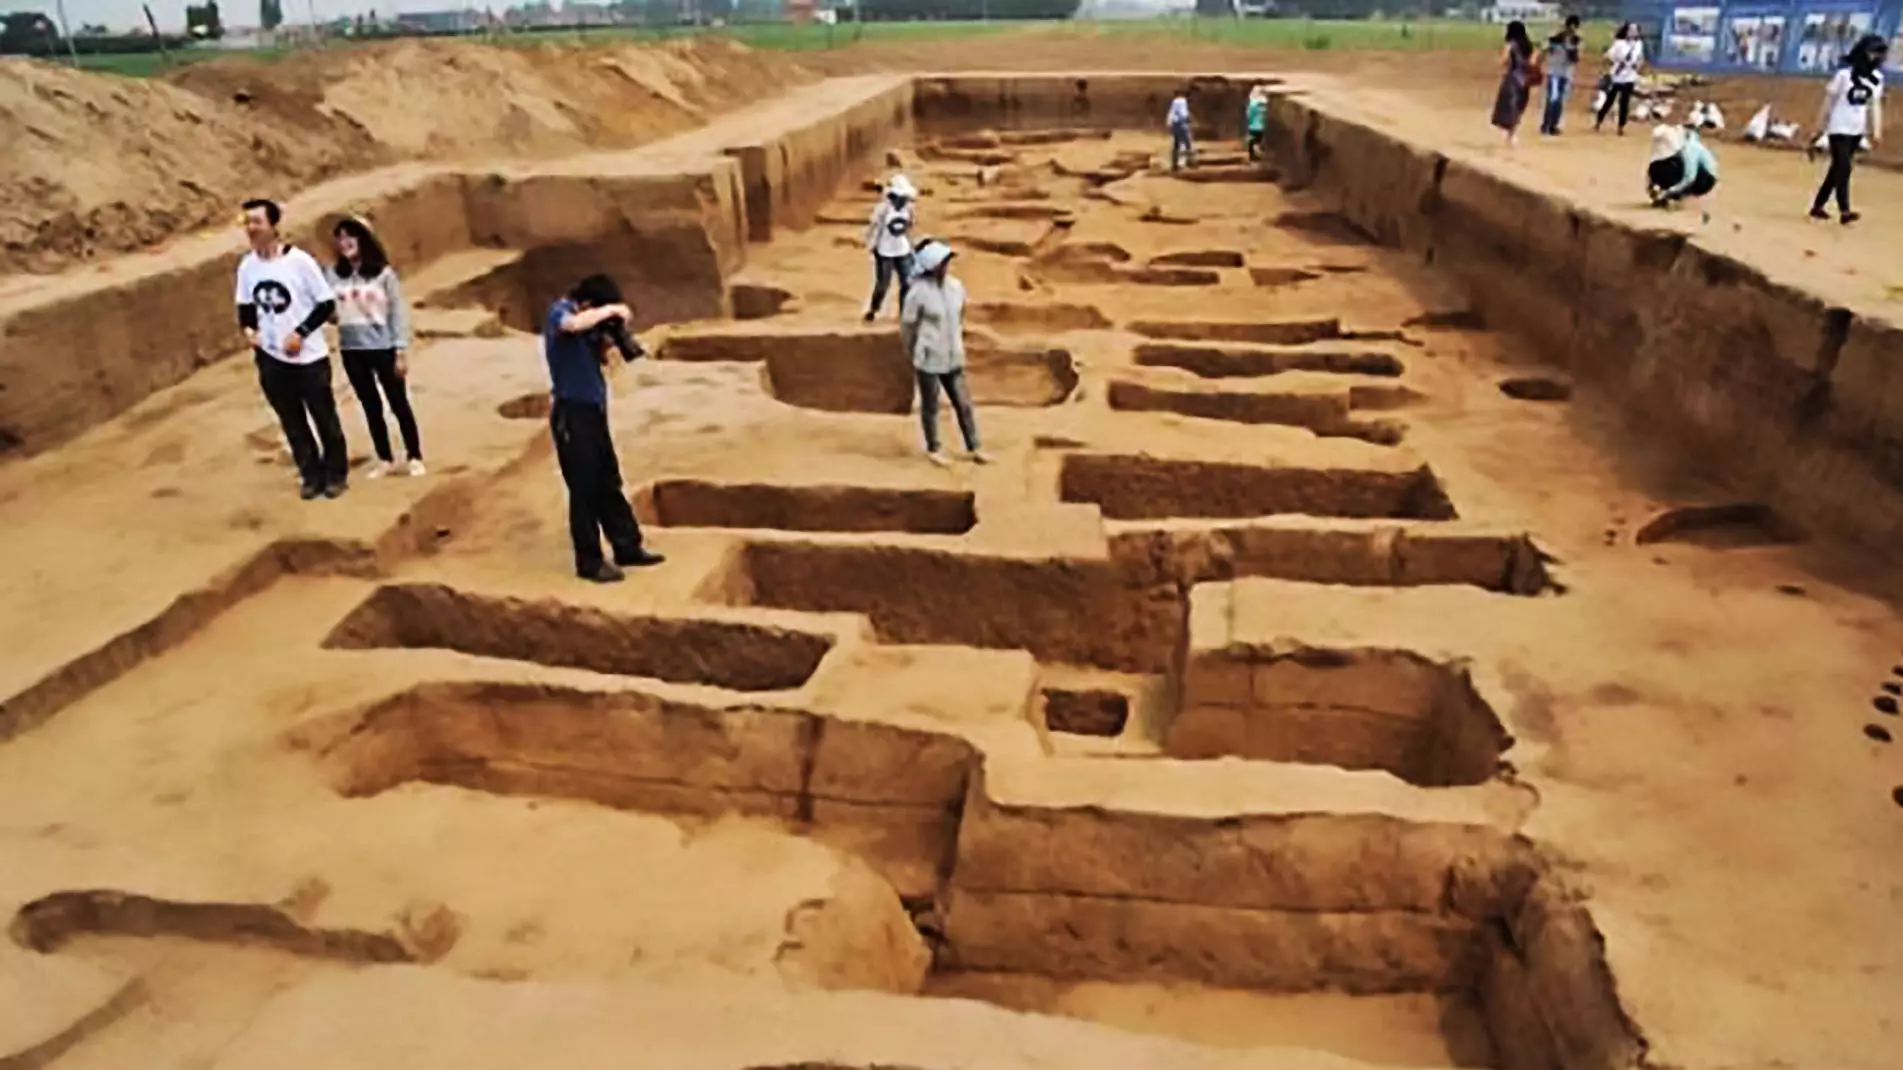 Bizarre 'Giant' Skeletons Discovered In Eastern China